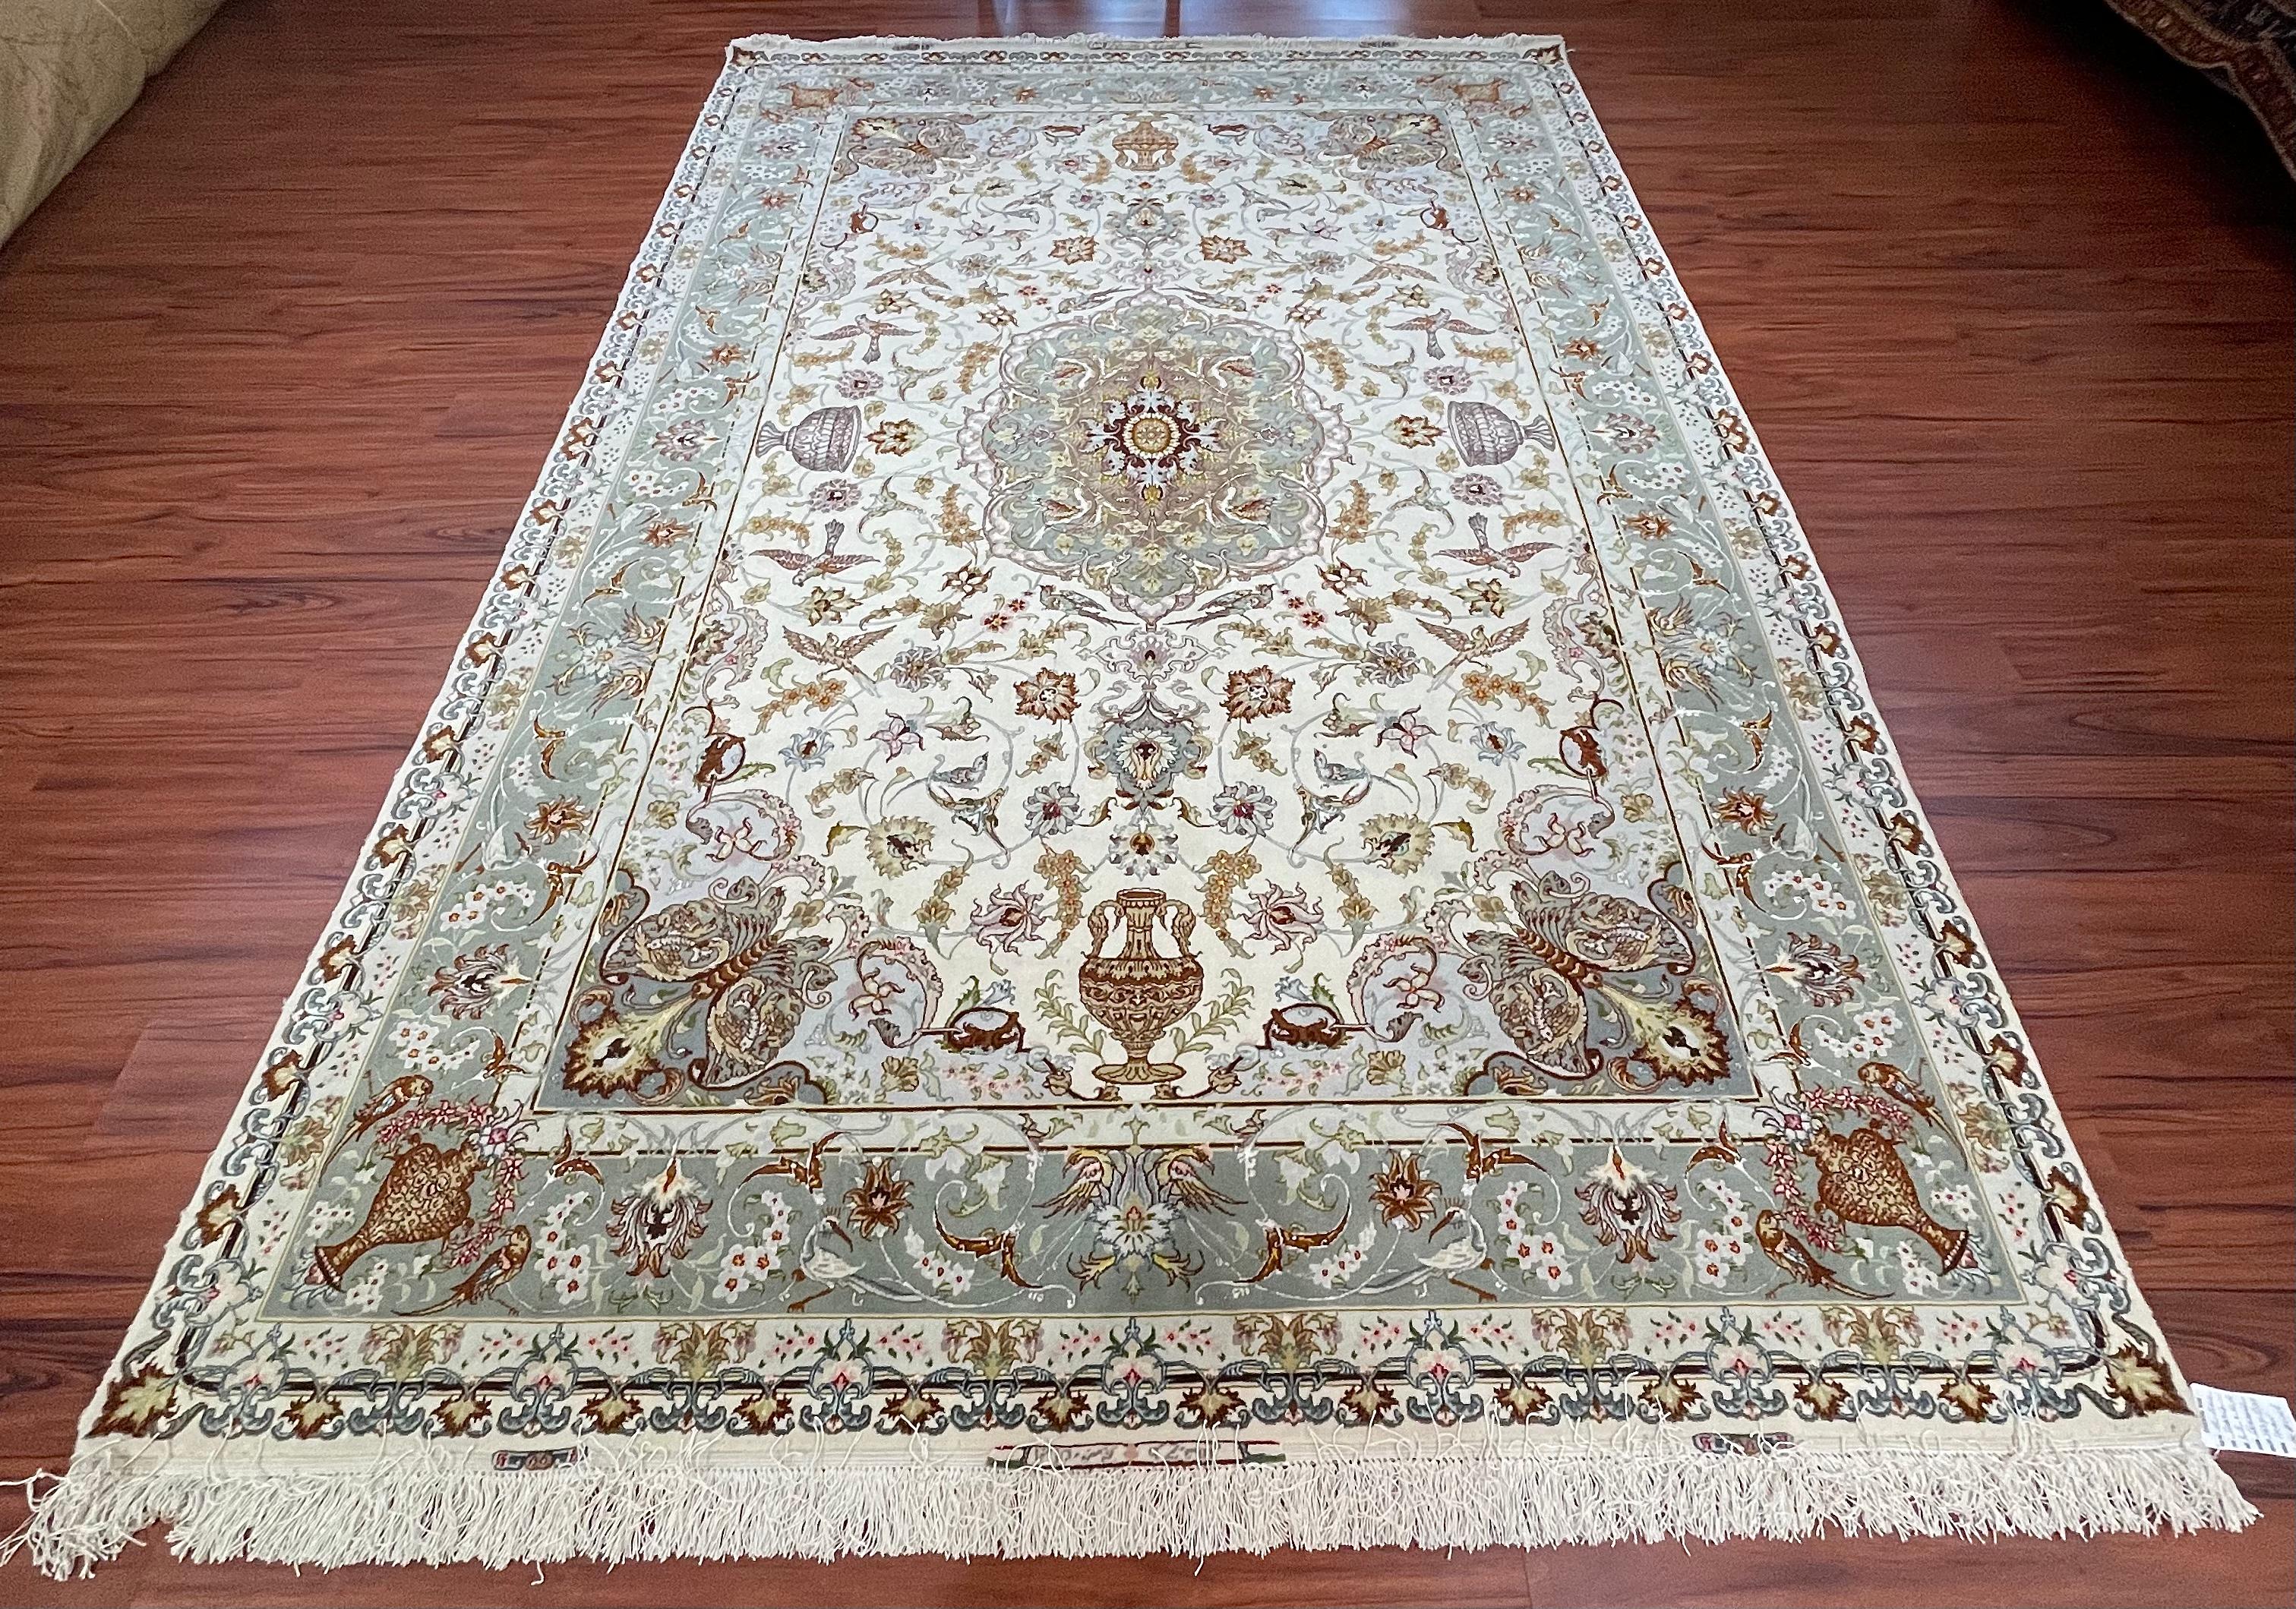 Excellent condition Persian Tabriz Rug/Carpet. This item is hand-Knotted and beautifully made. The Rug originated from Iran in the 1970s and is stunning.